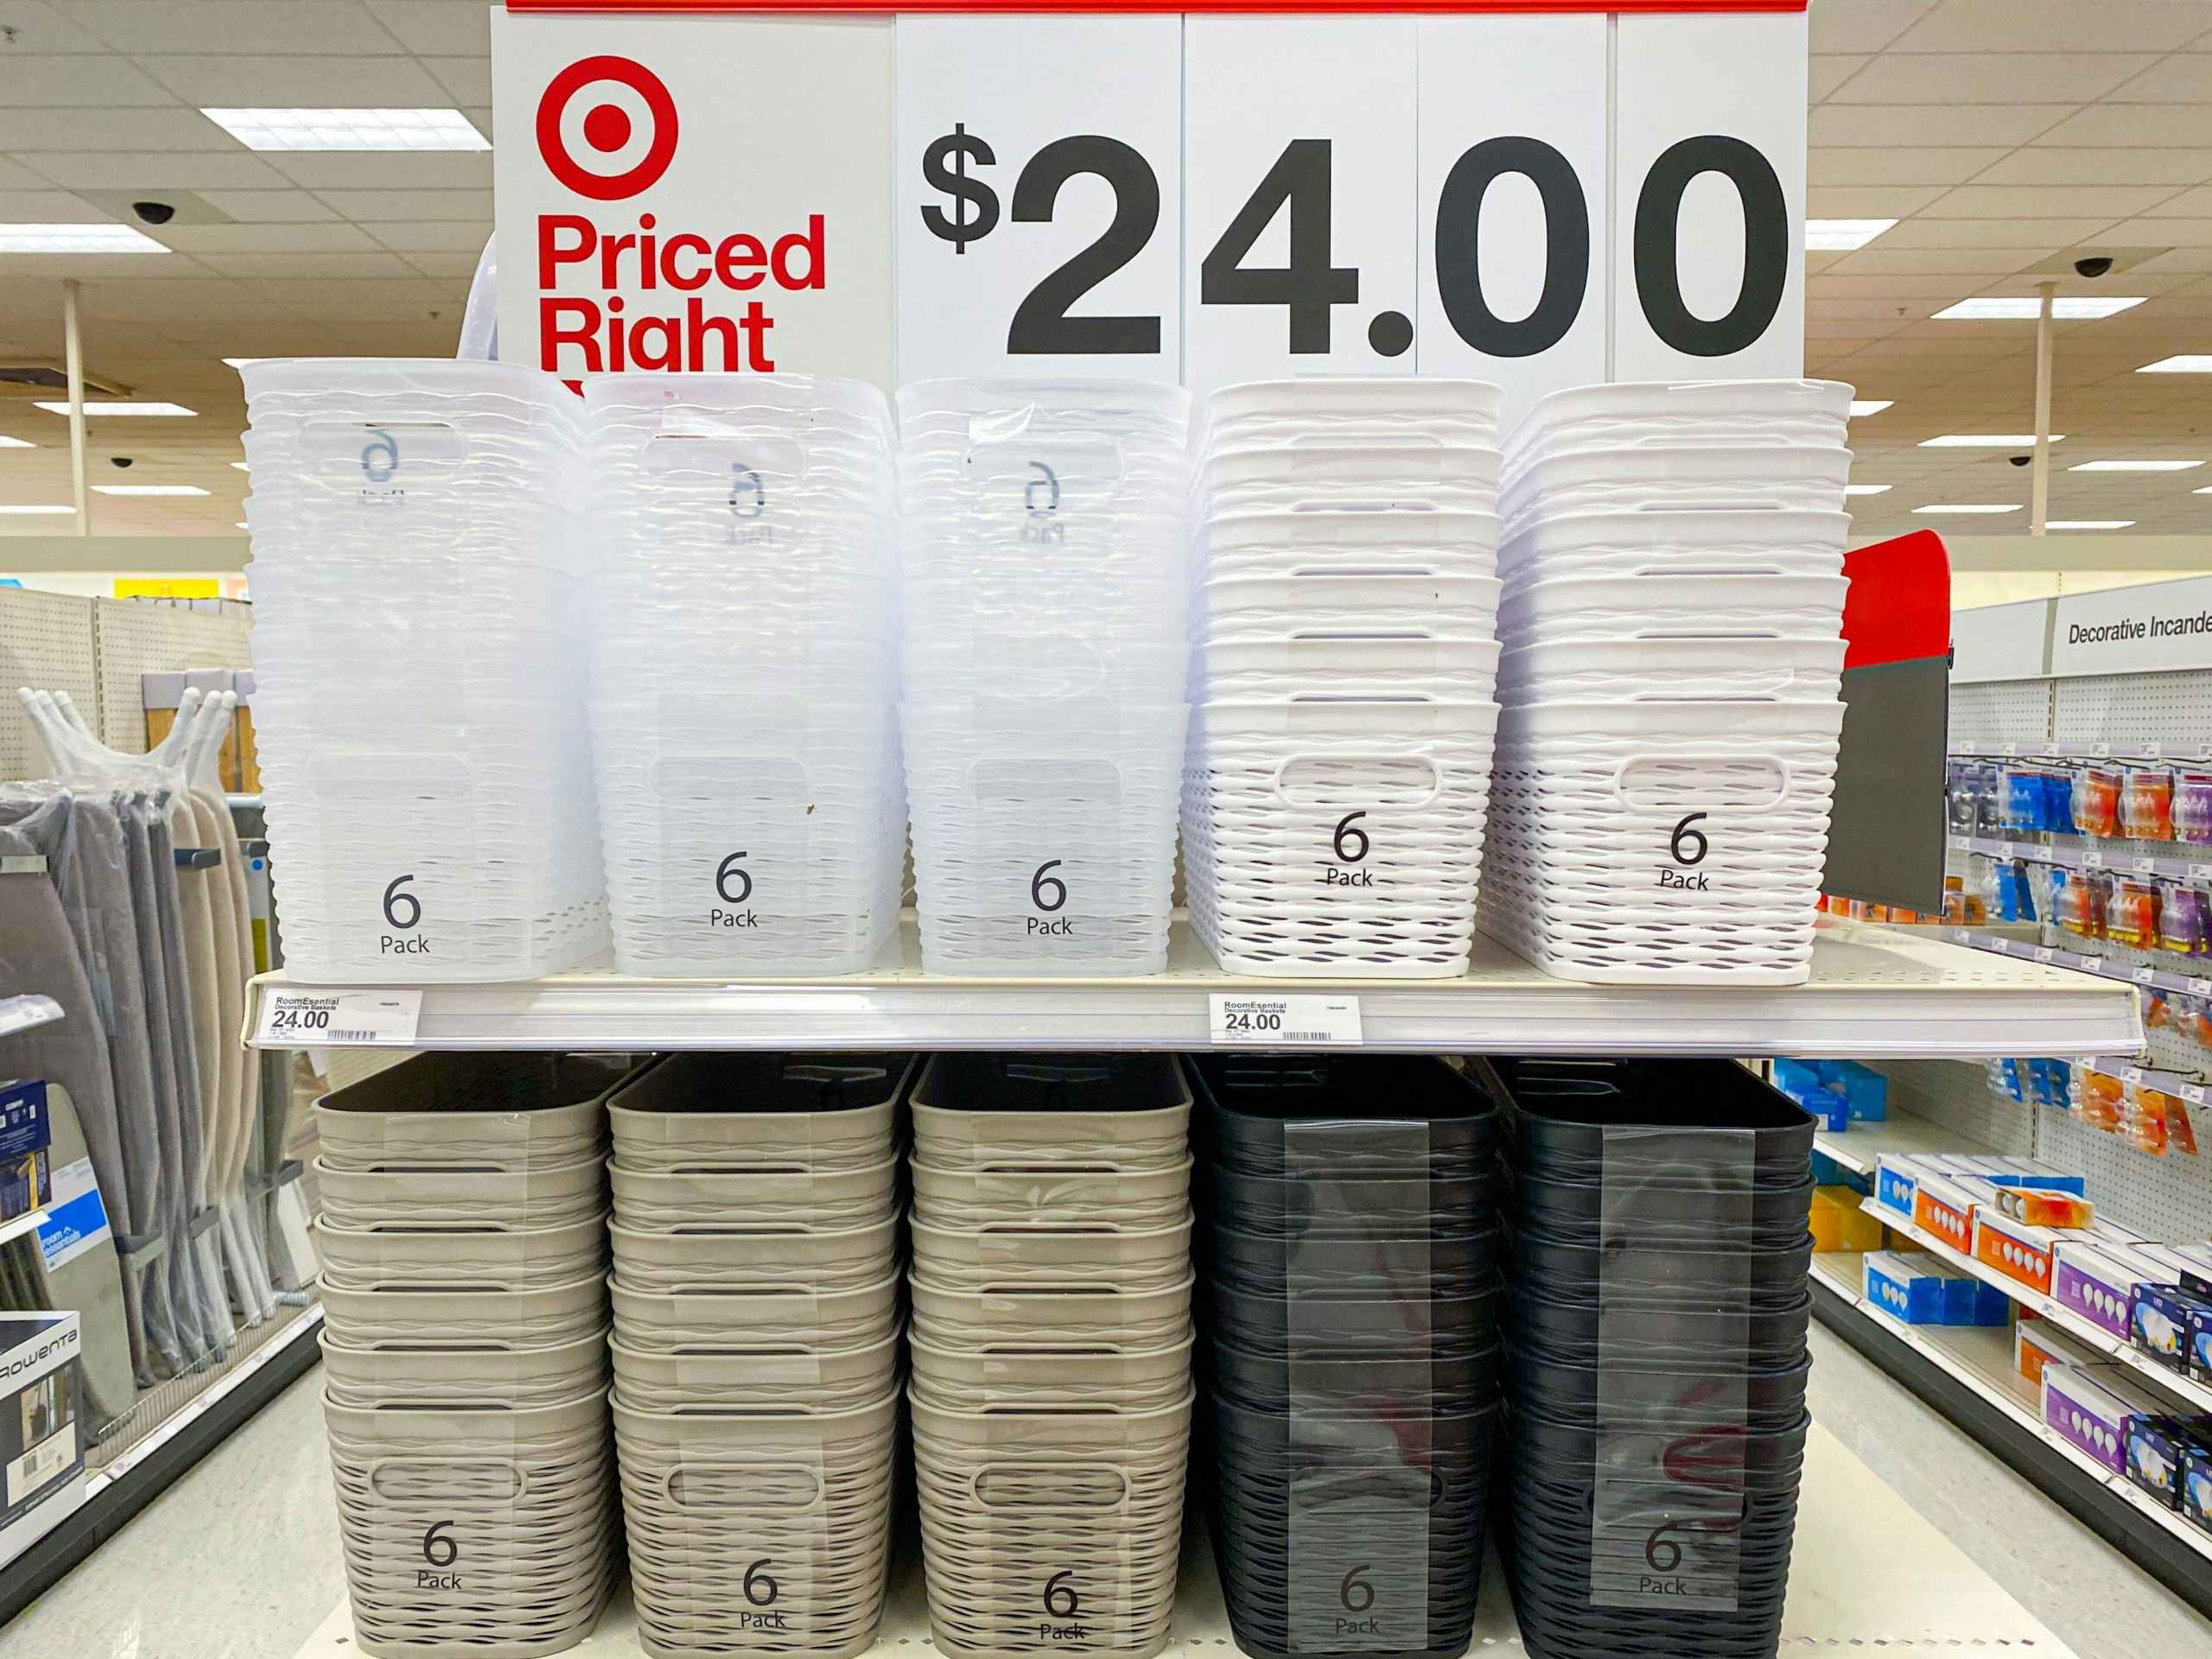 An end-cap shelf at Target displaying 6-packs of storage bins in different colors, advertised as $24.00 above the shelf.